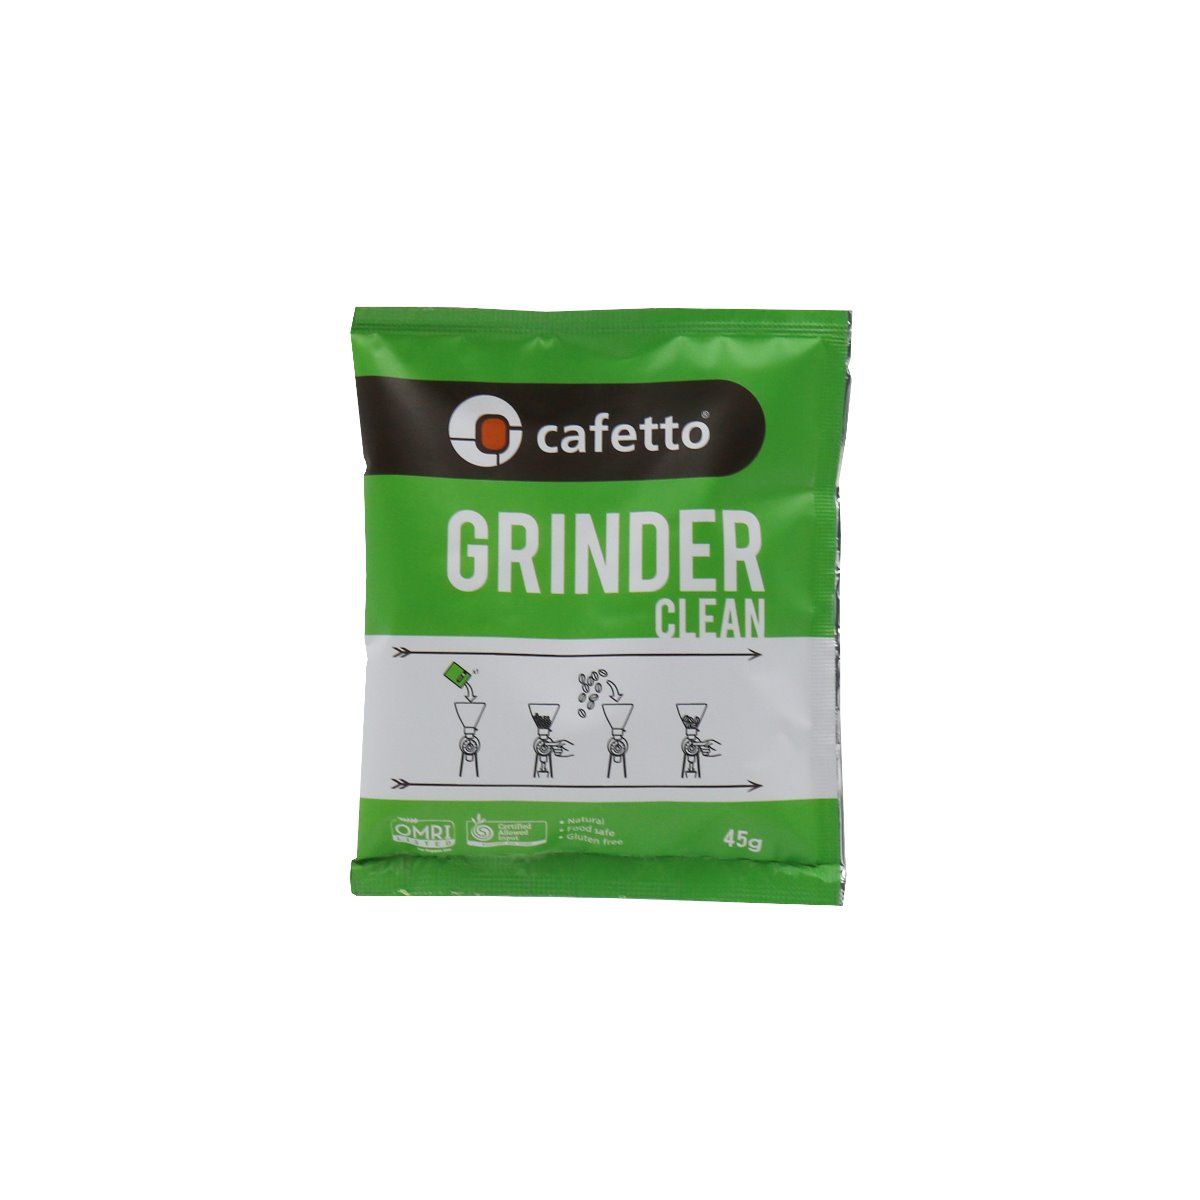 Cafetto Grinder Clean Sachets - 3 X 45g